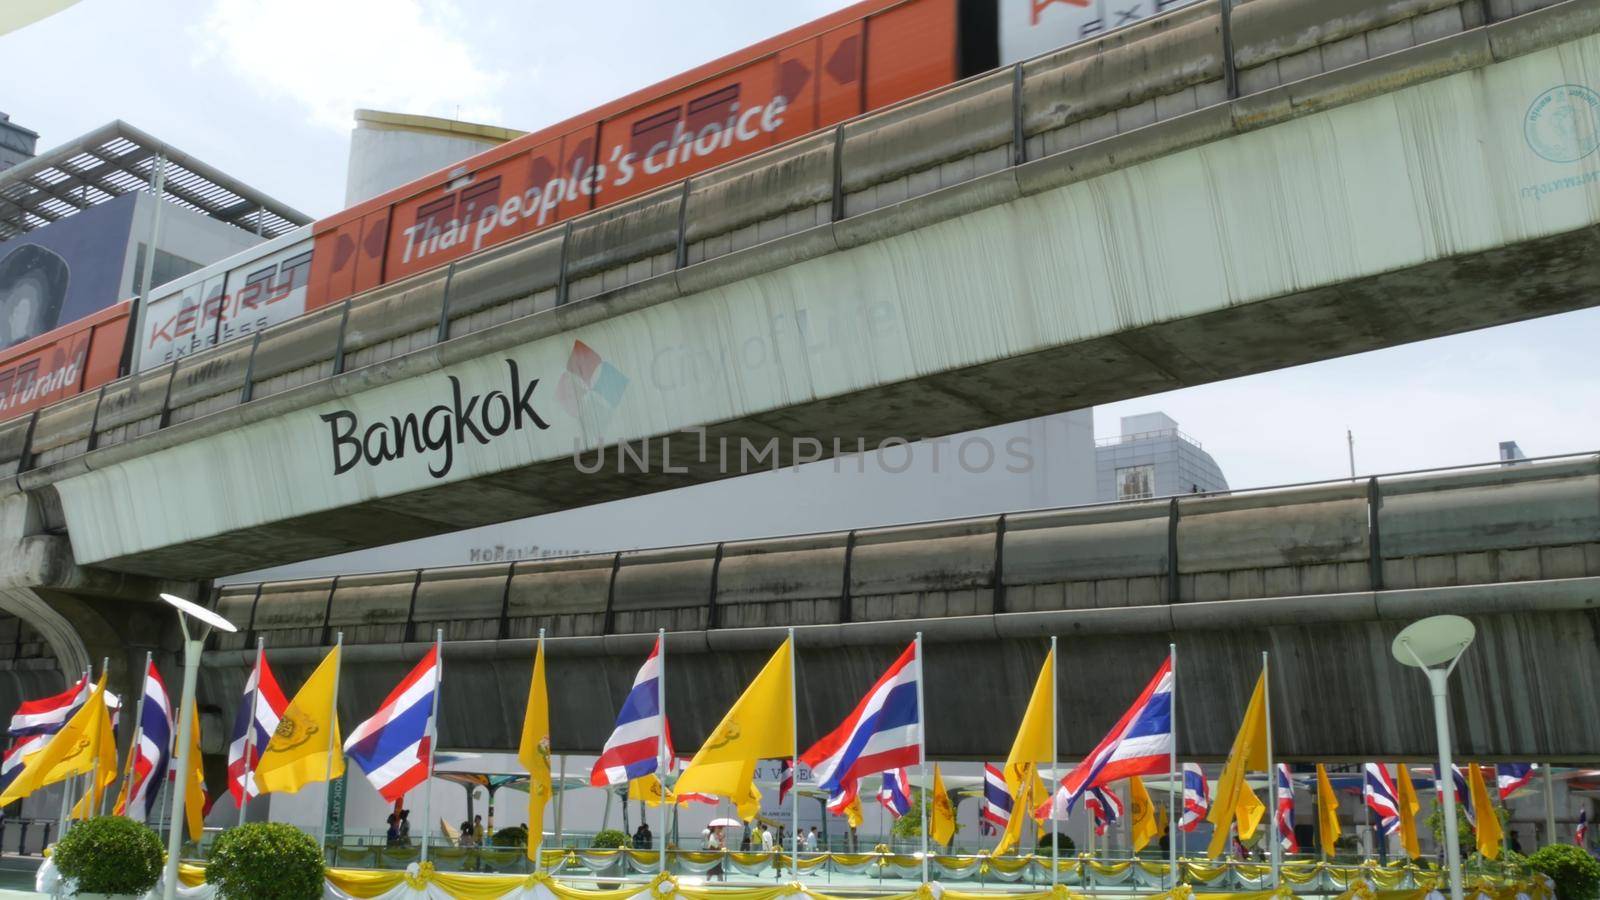 BANGKOK, THAILAND - 11 JULY, 2019: Pedestrians walking on the bridge near MBK and Siam Square under BTS train line. People in festive modern city decorated with waving national flags and royal symbol.